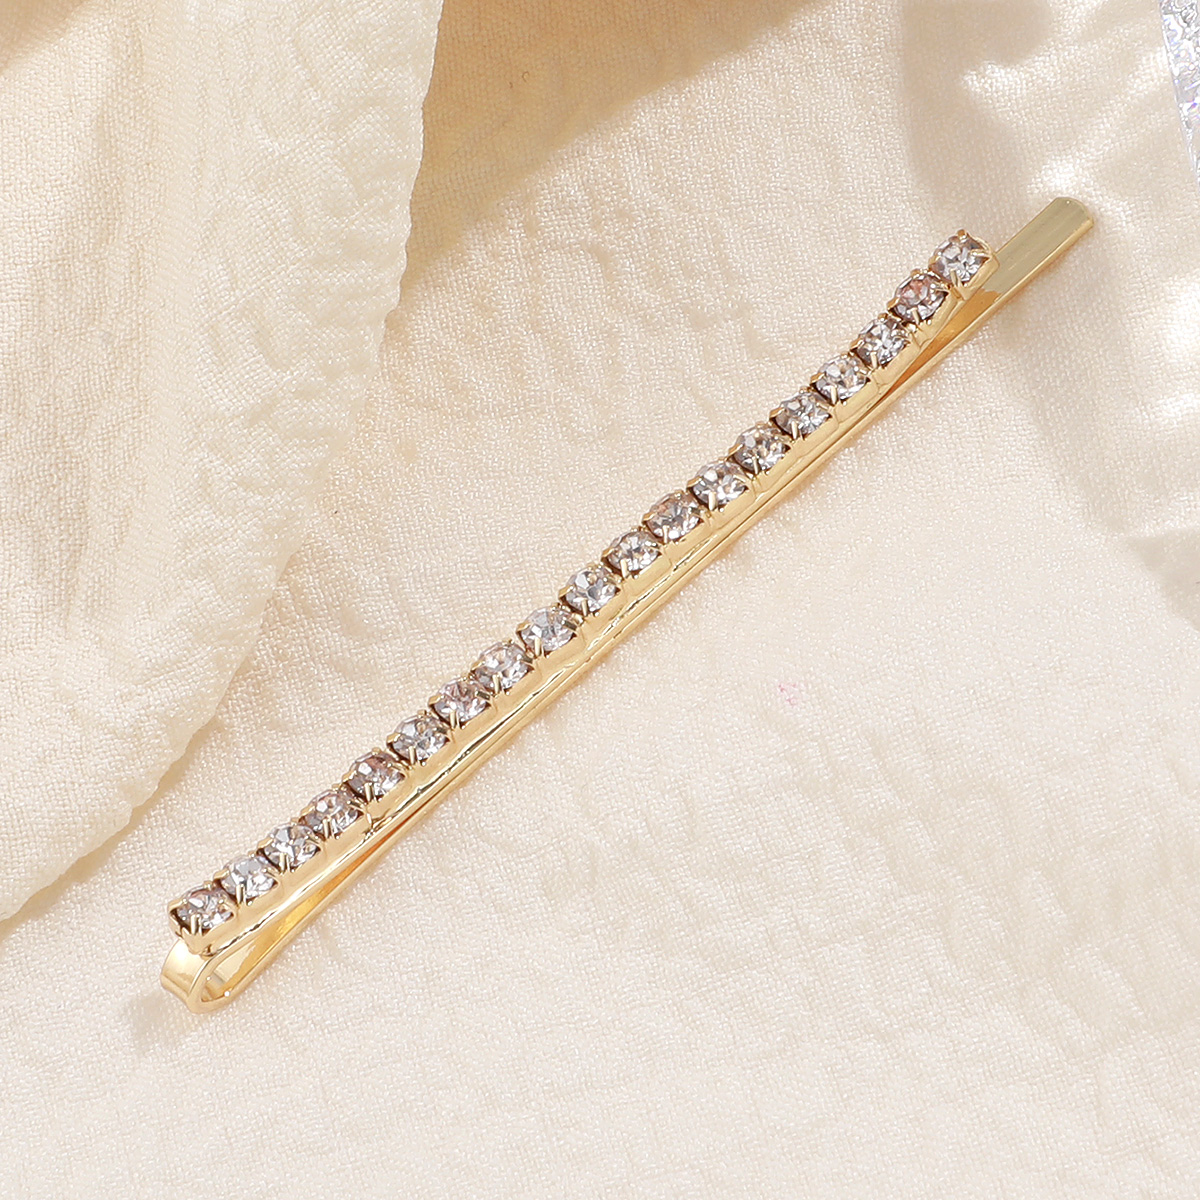 Gold and silver rhinestone hairpin hair accessoriespicture2